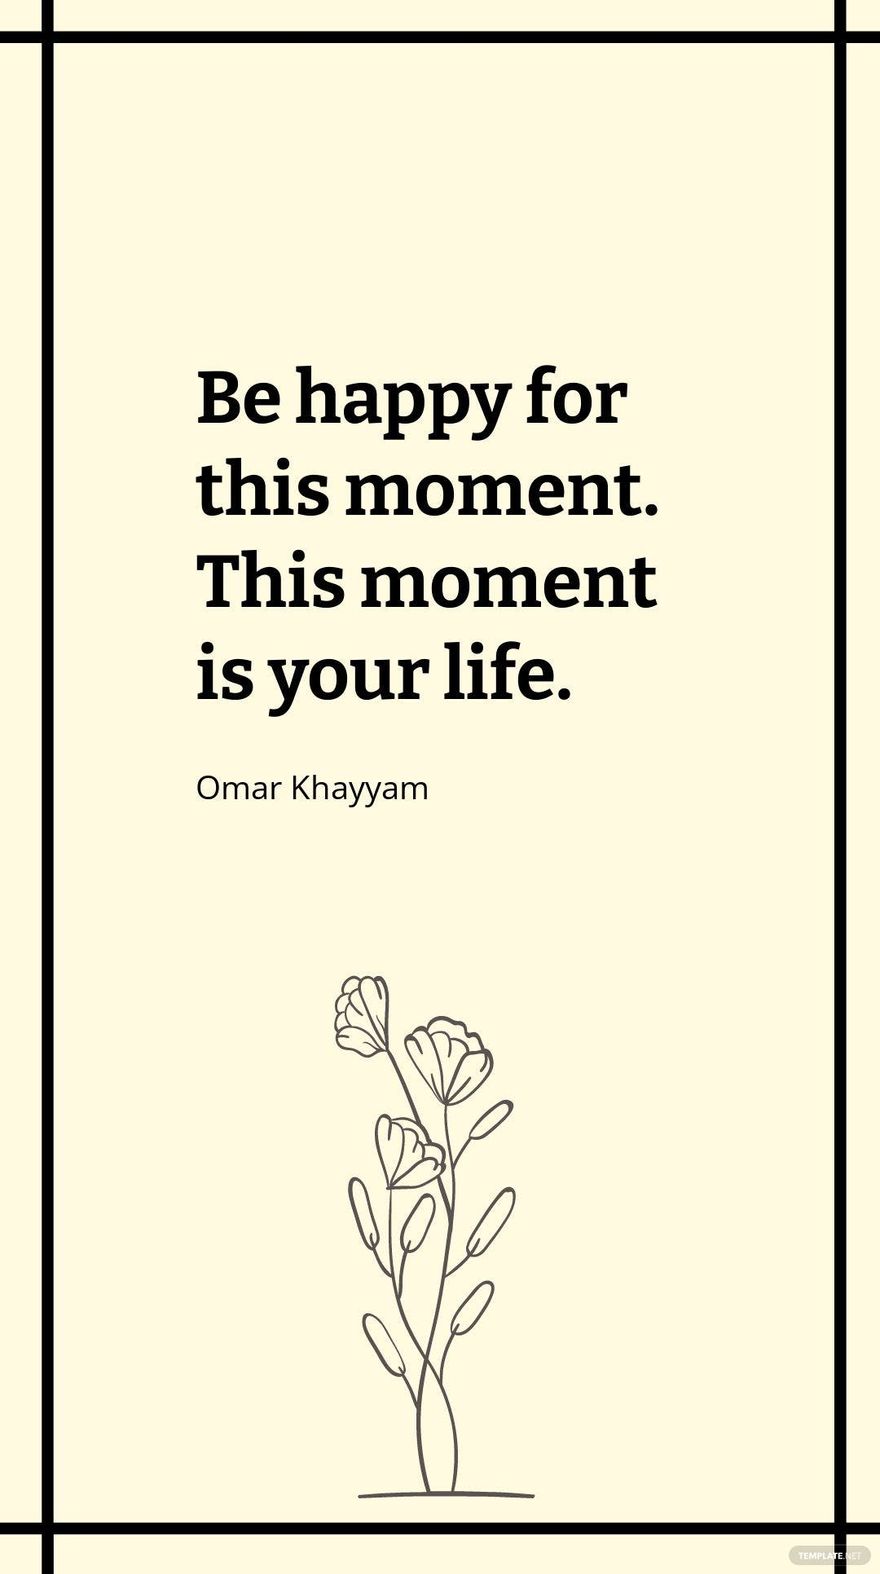 Omar Khayyam - Be happy for this moment. This moment is your life.